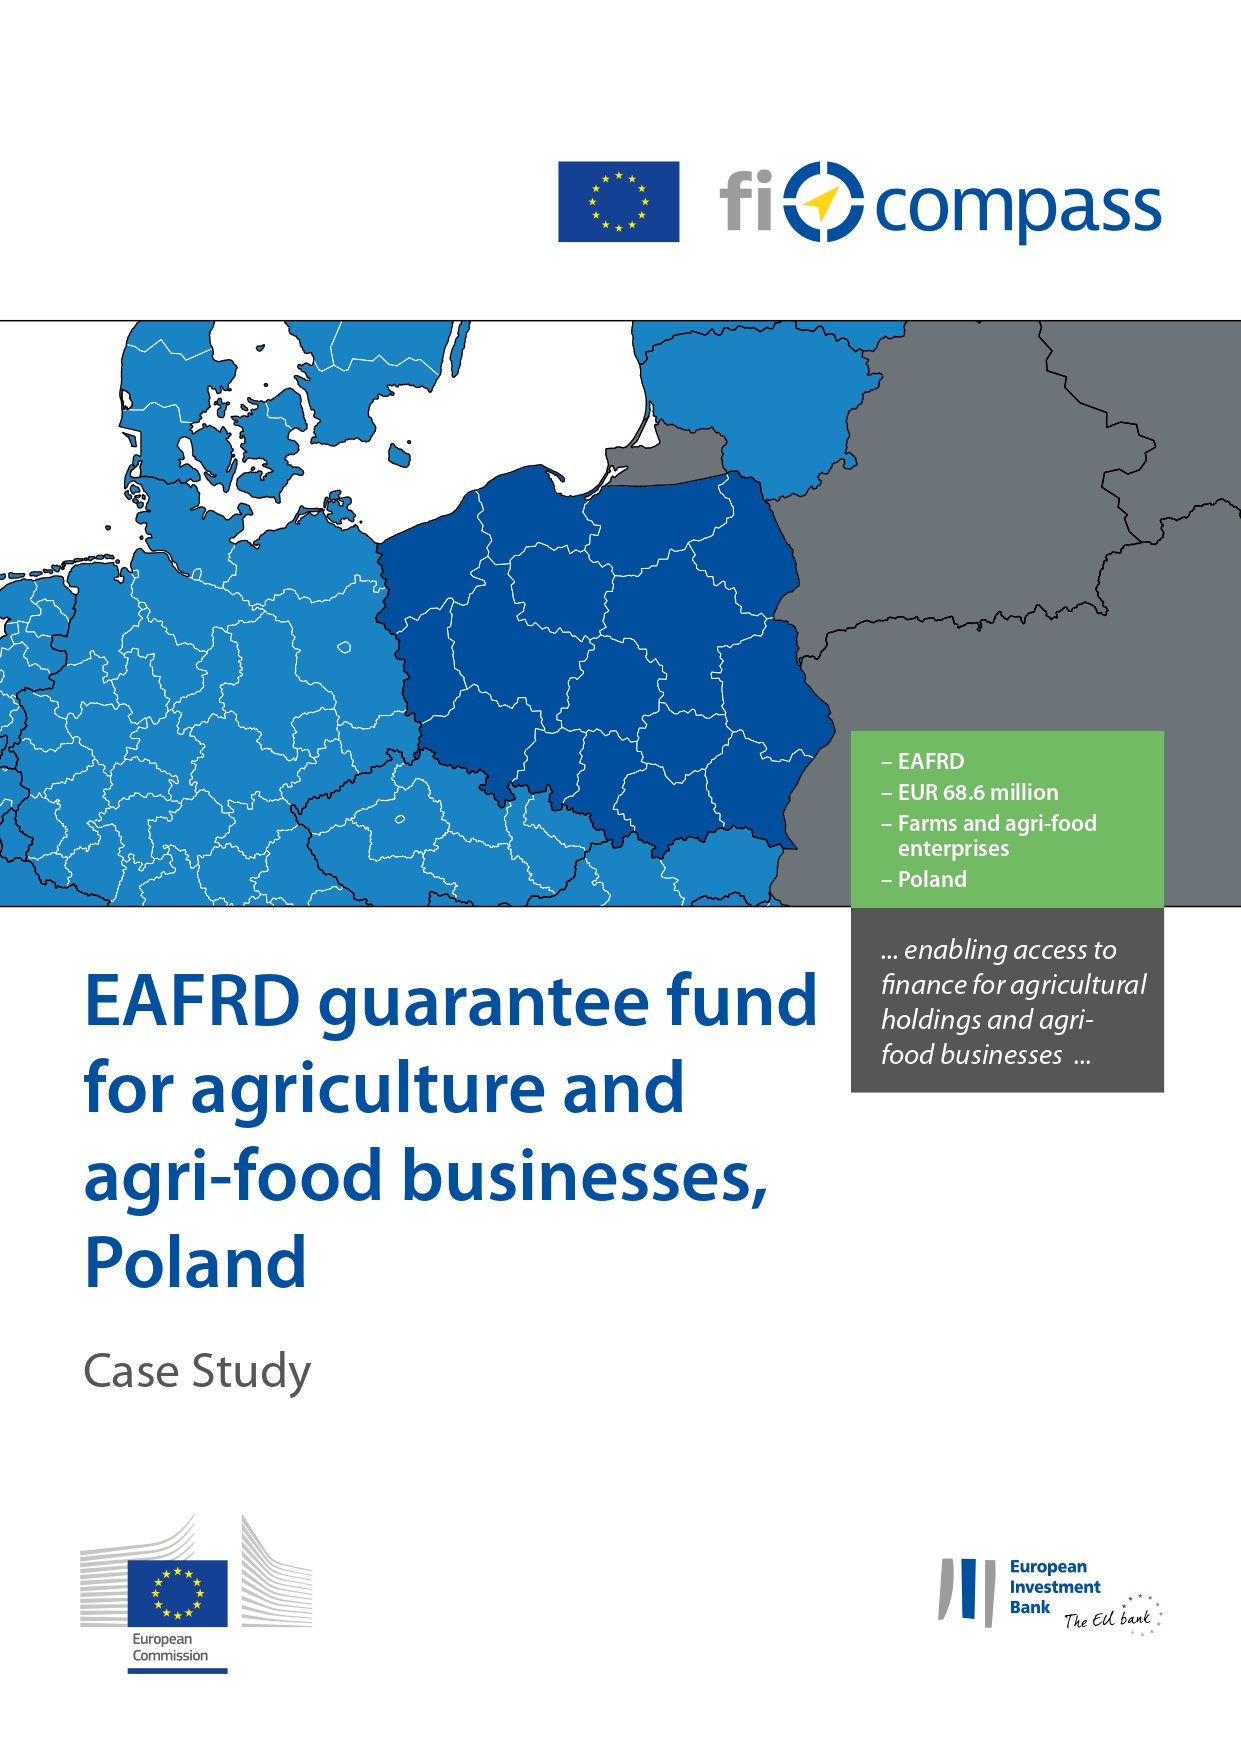 EAFRD guarantee fund for agriculture and agri-food businesses, Poland